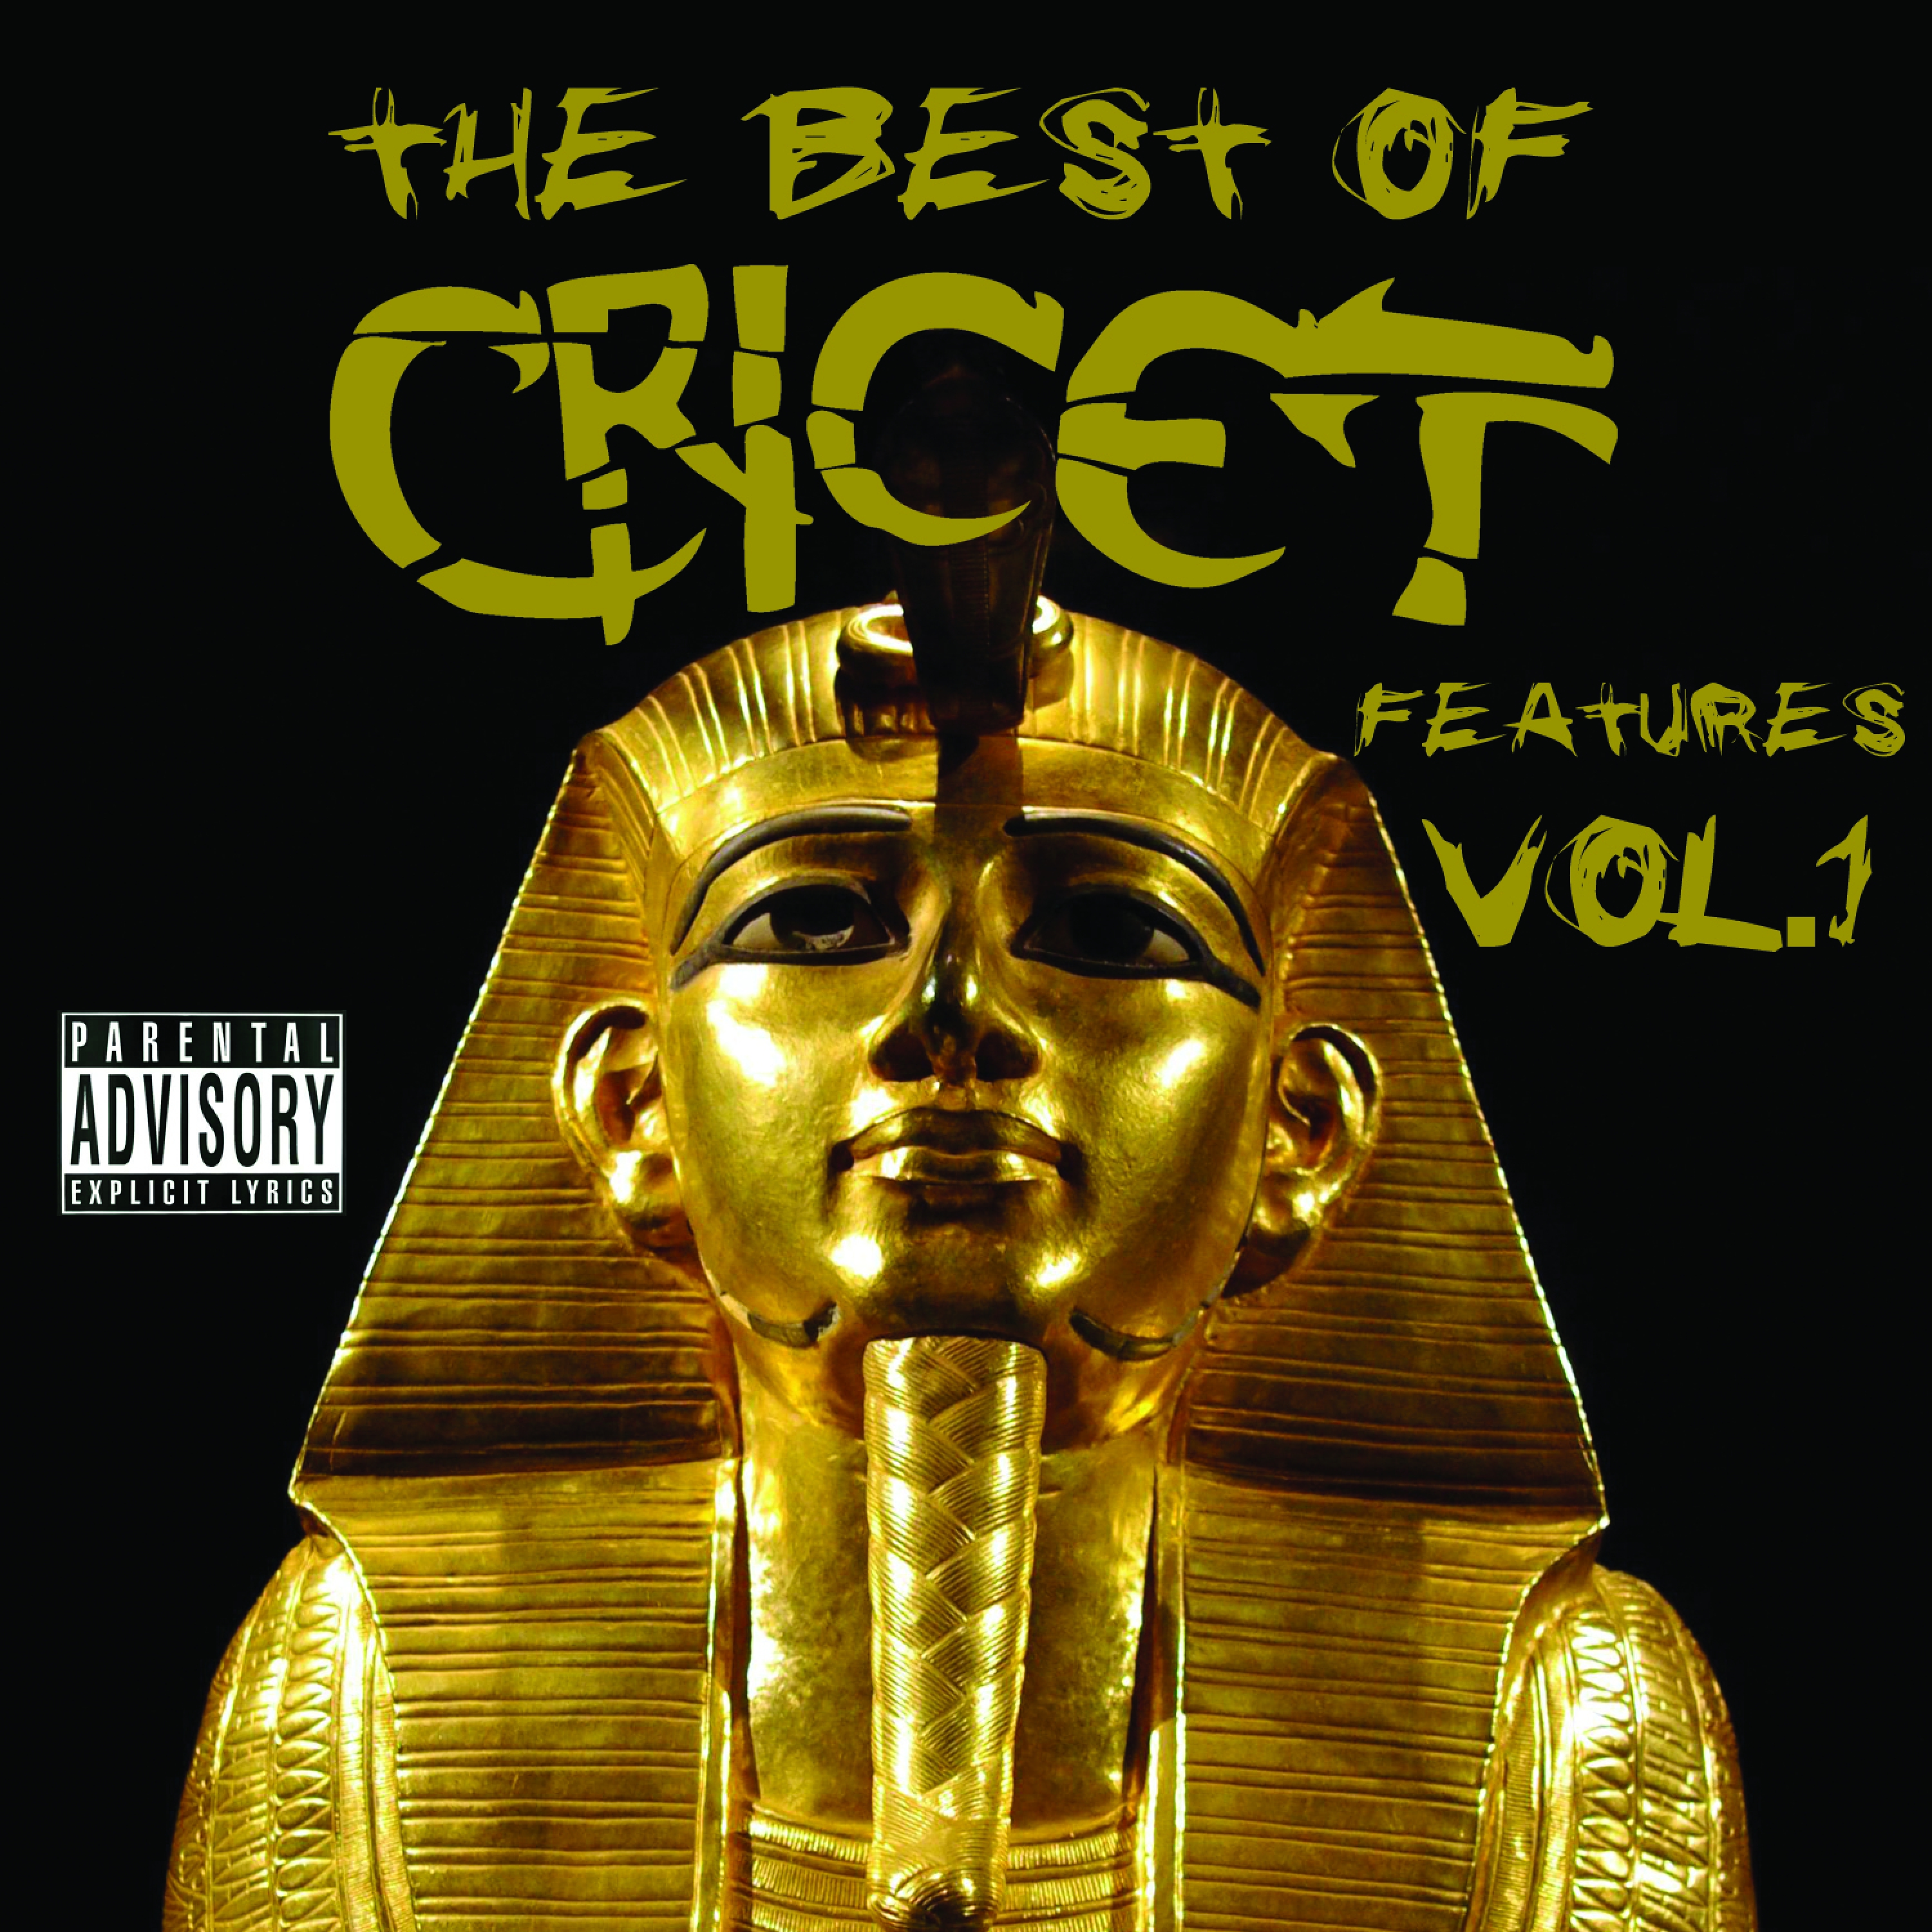 The Best of Cricet Features, Vol. 1